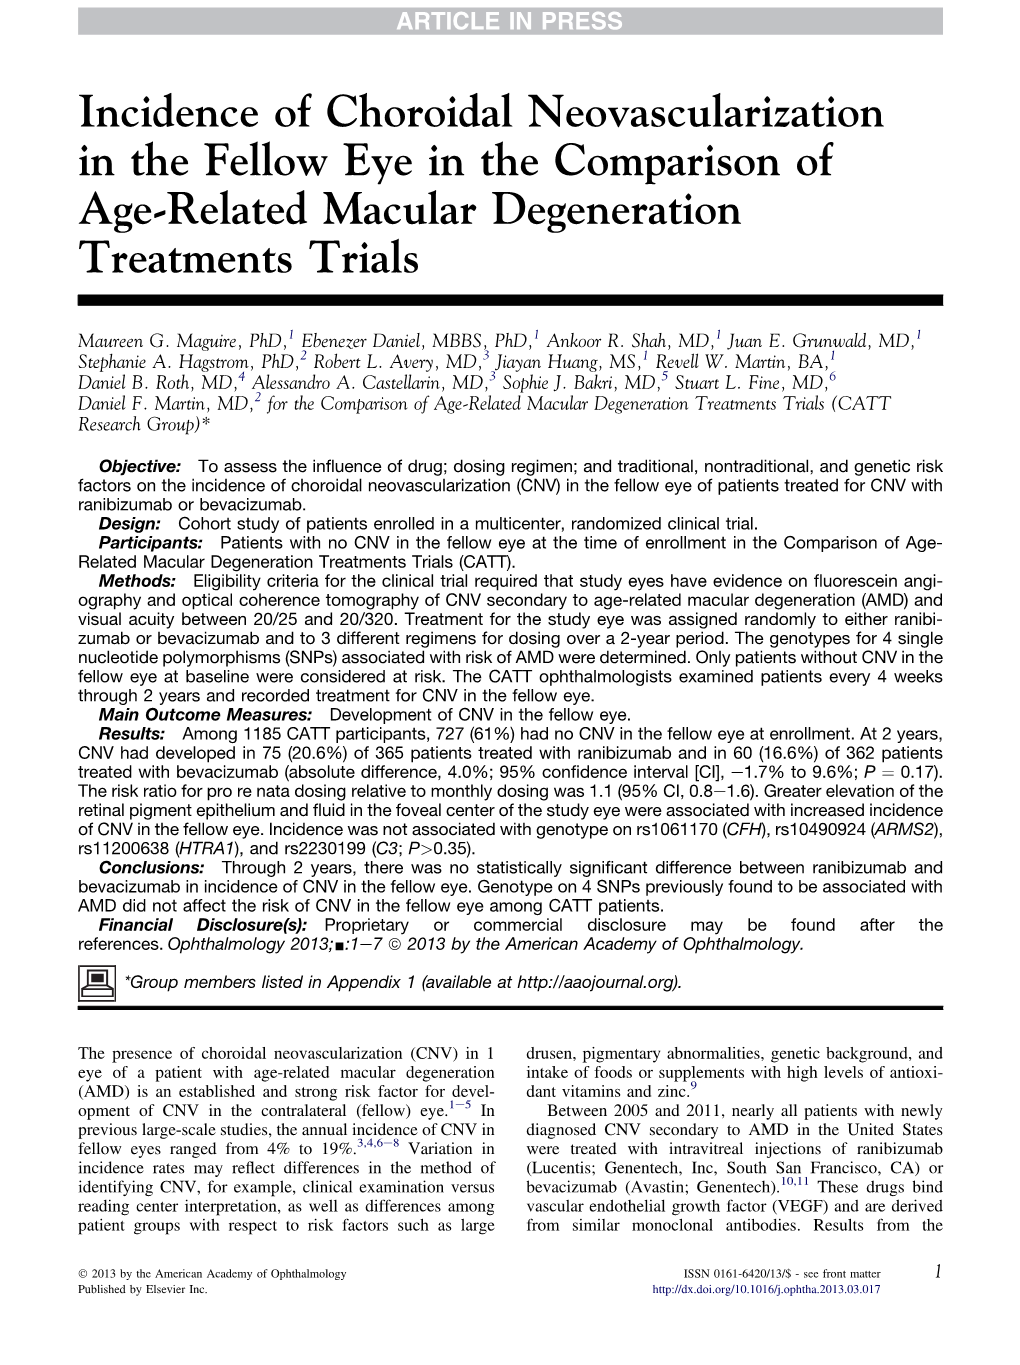 The Fellow Eye in the Comparison of Age-Related Macular Degeneration Treatments Trials